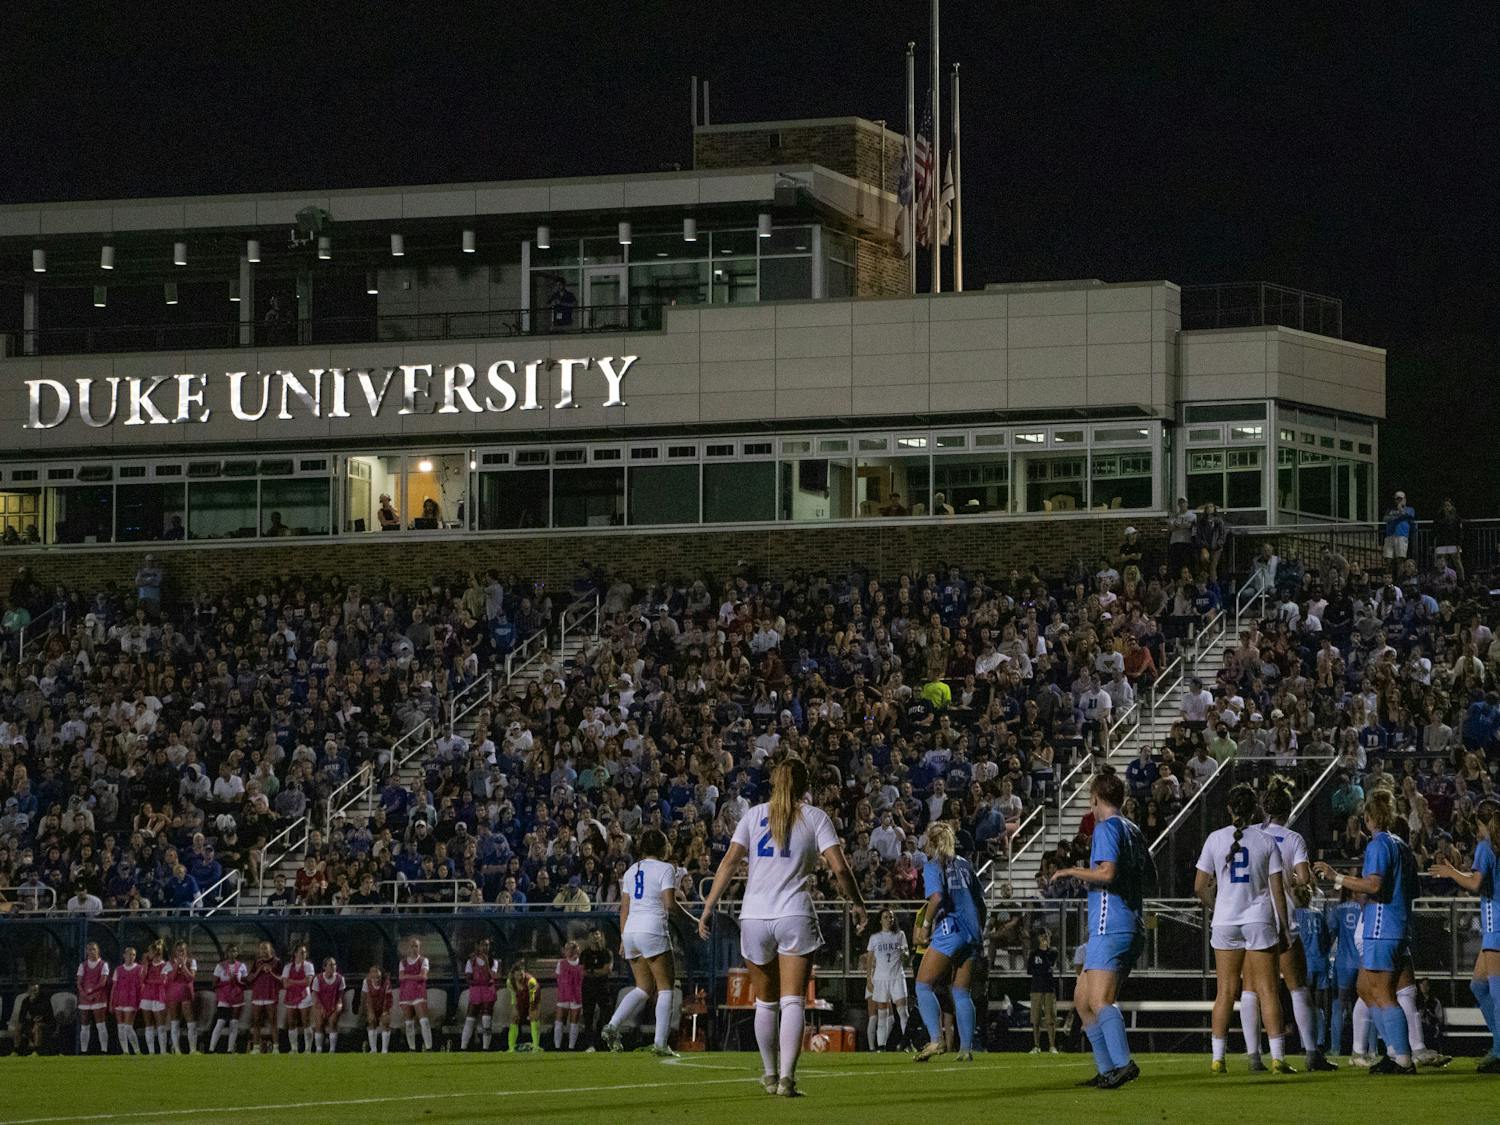 North Carolina defeated Duke in front of a packed Koskinen Stadium crowd.